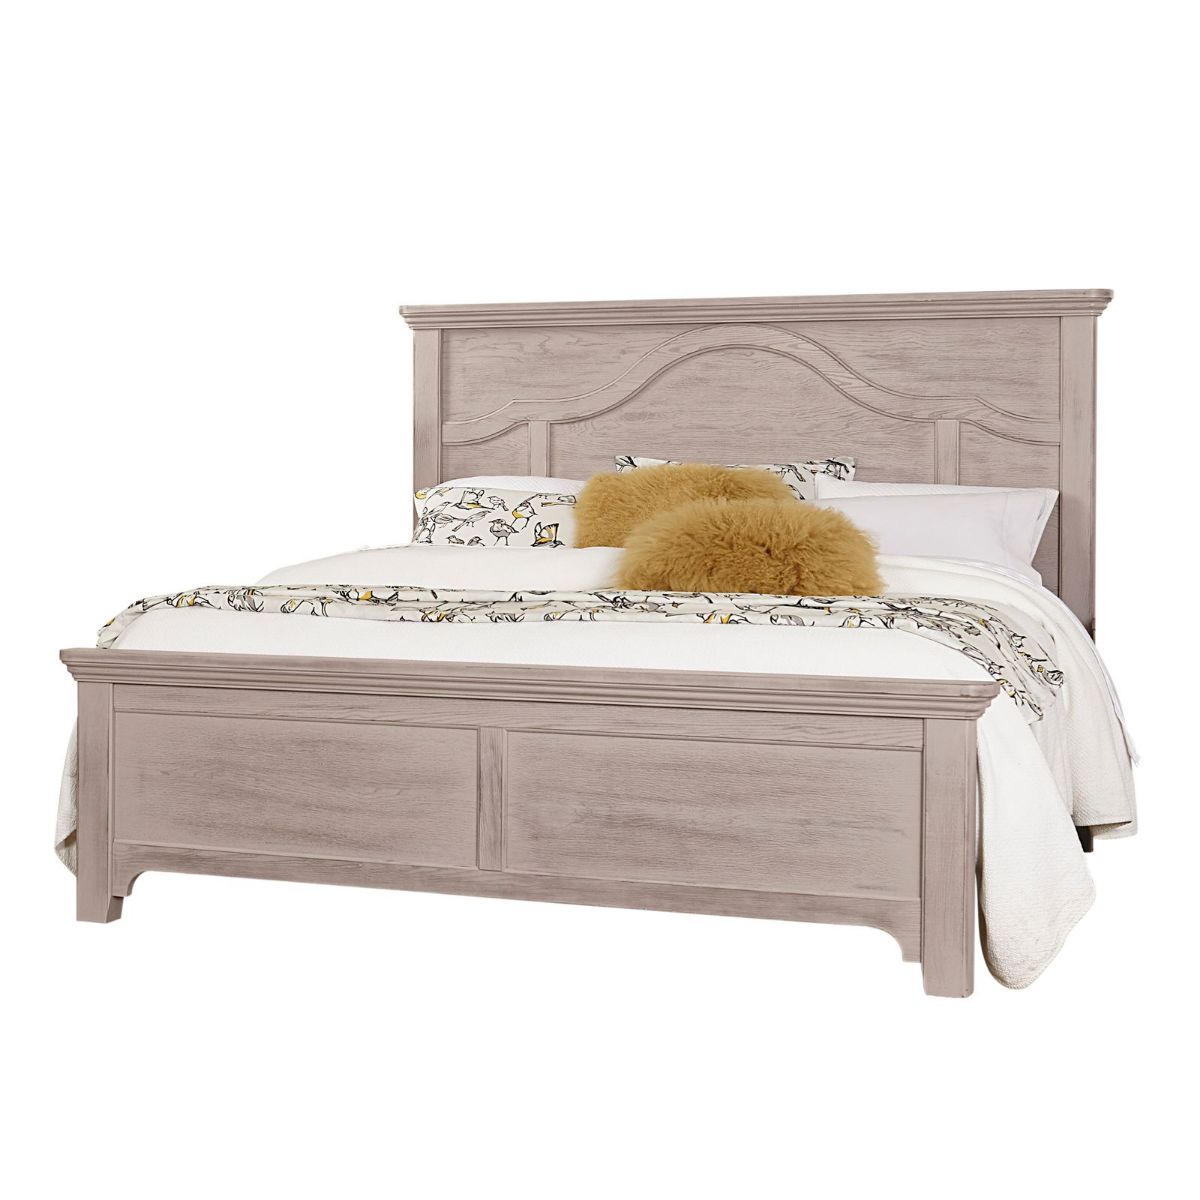 Picture of Bungalow Queen Mantel Bed